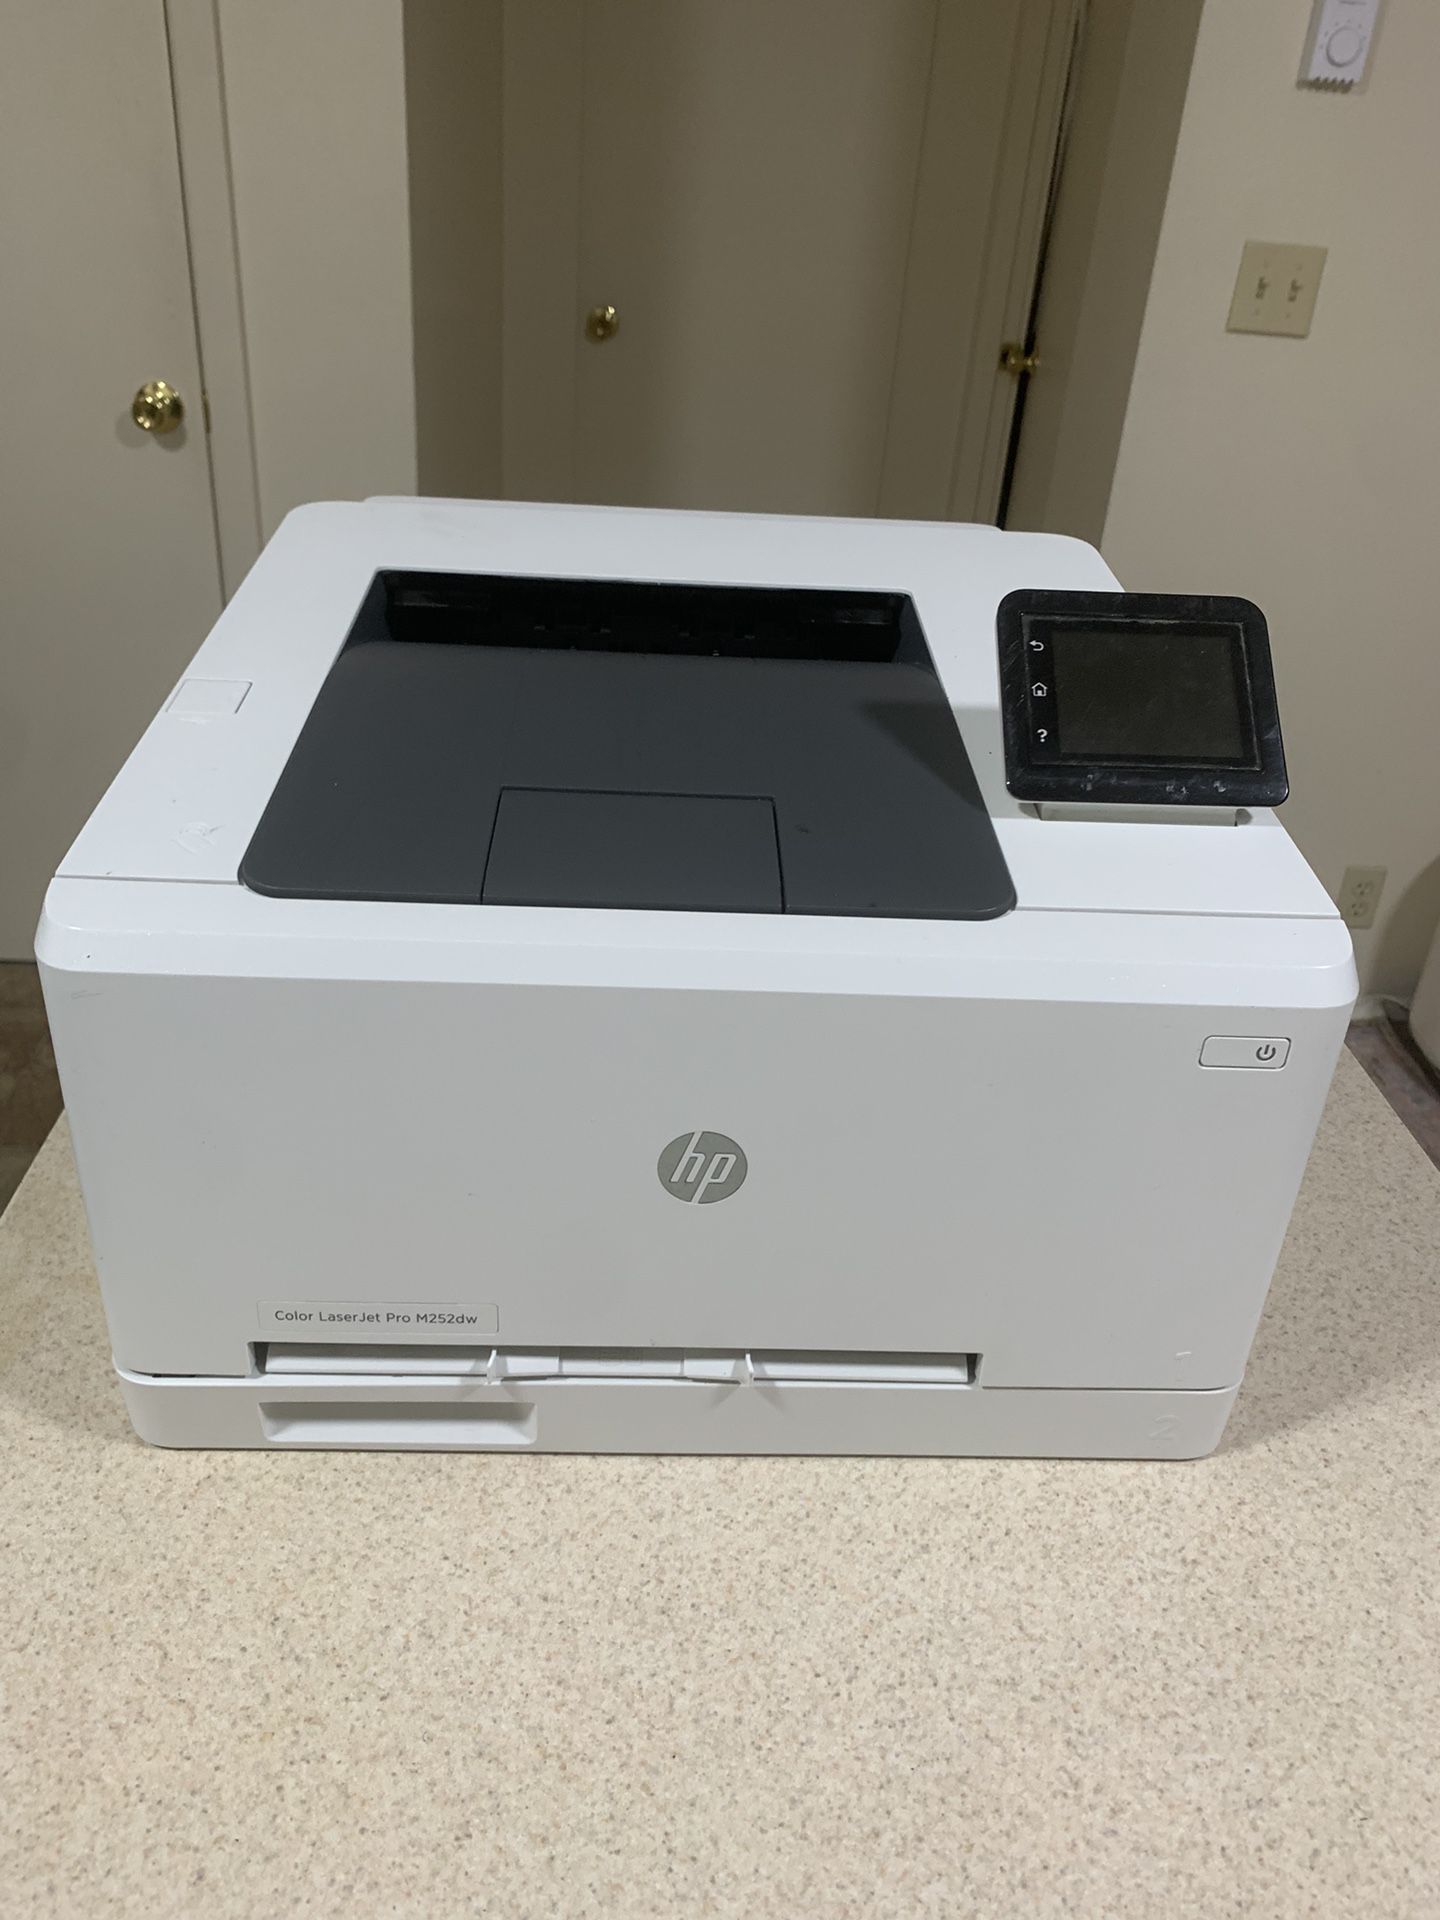 COLOR LASERJET PRO M252DW WIRELESS DUPLEX LASER PRINTER - 36213 PAGES PRINTED W/ for Sale Hillsboro, OR - OfferUp